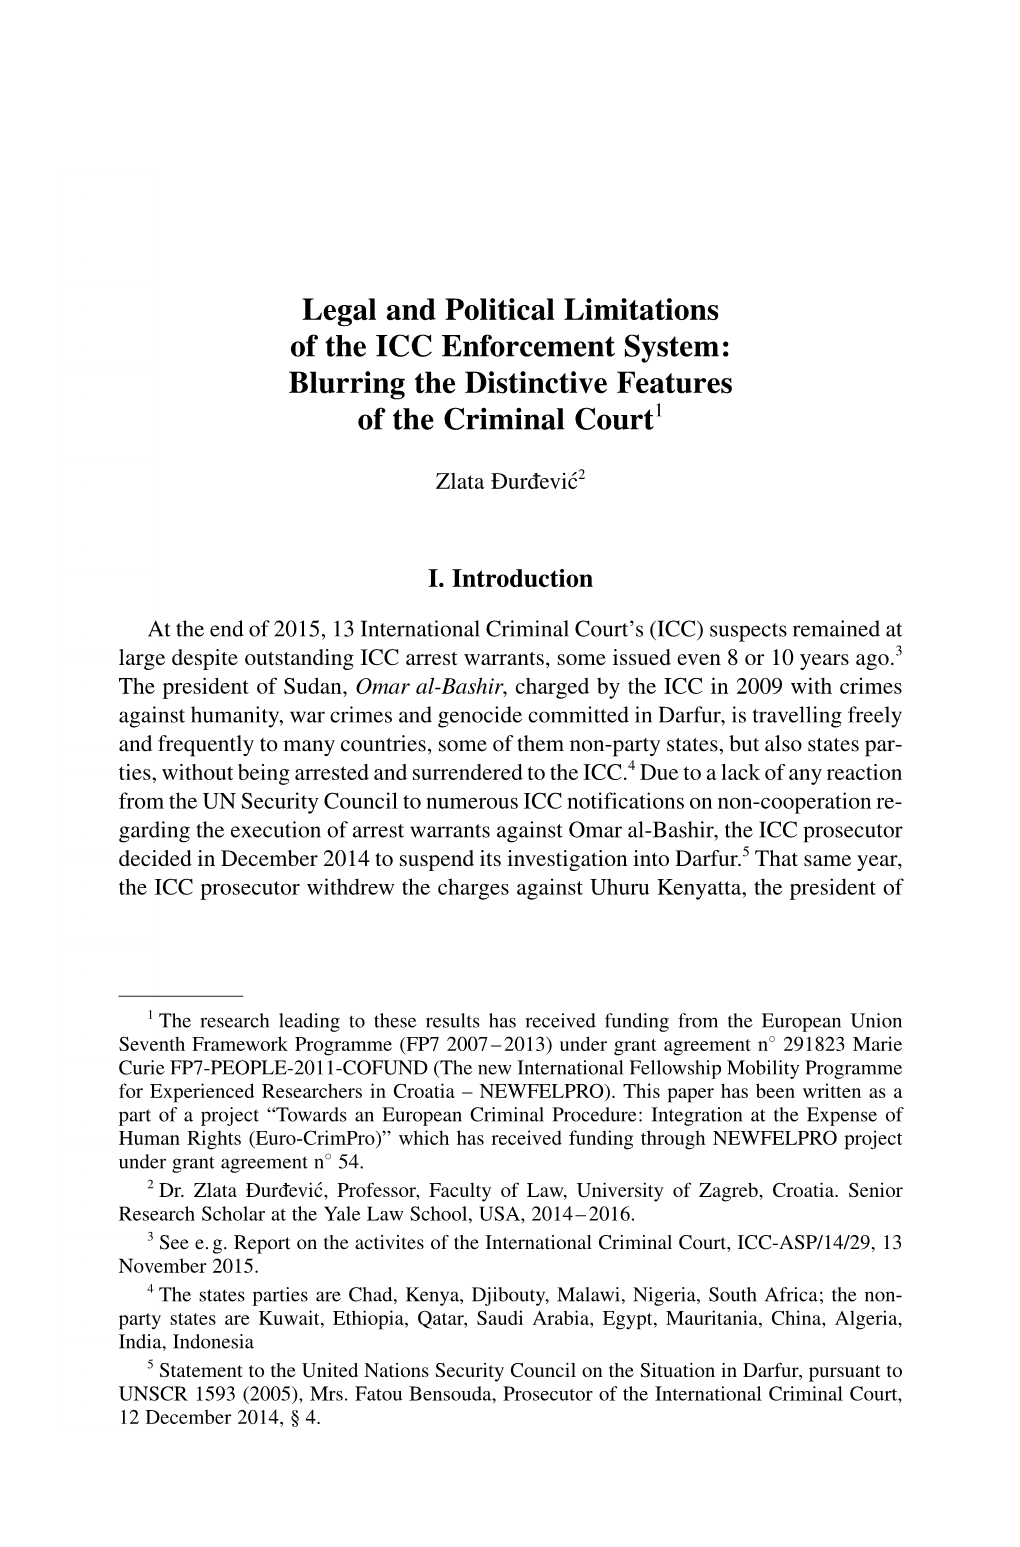 Legal and Political Limitations of the ICC Enforcement System 165